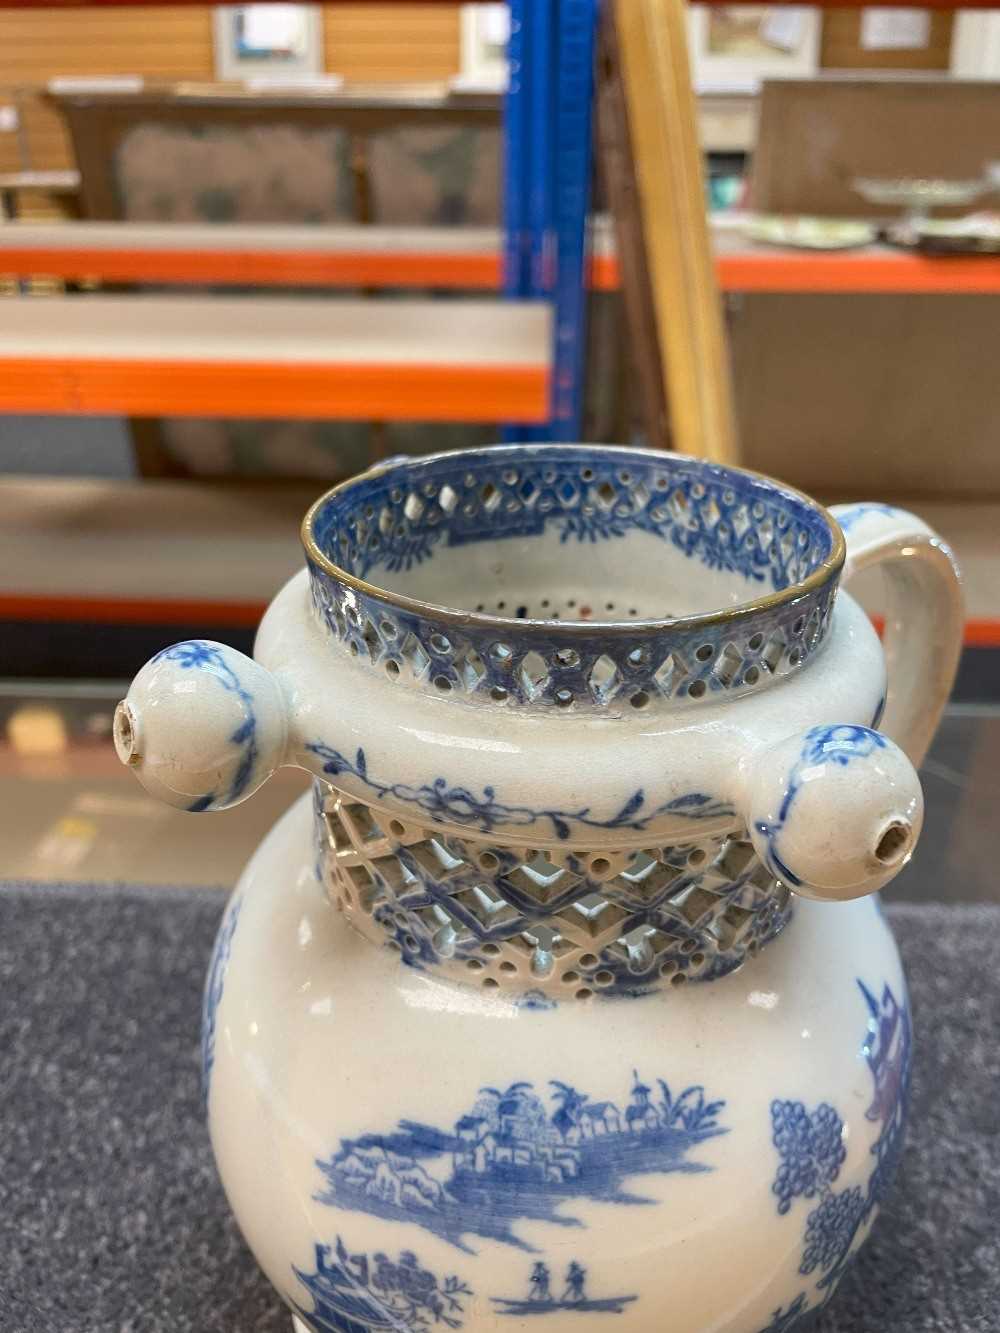 SWANSEA CAMBRIAN PEARLWARE PUZZLE JUG circa 1810, printed in blue with the 'Longbridge' pattern, - Image 3 of 20